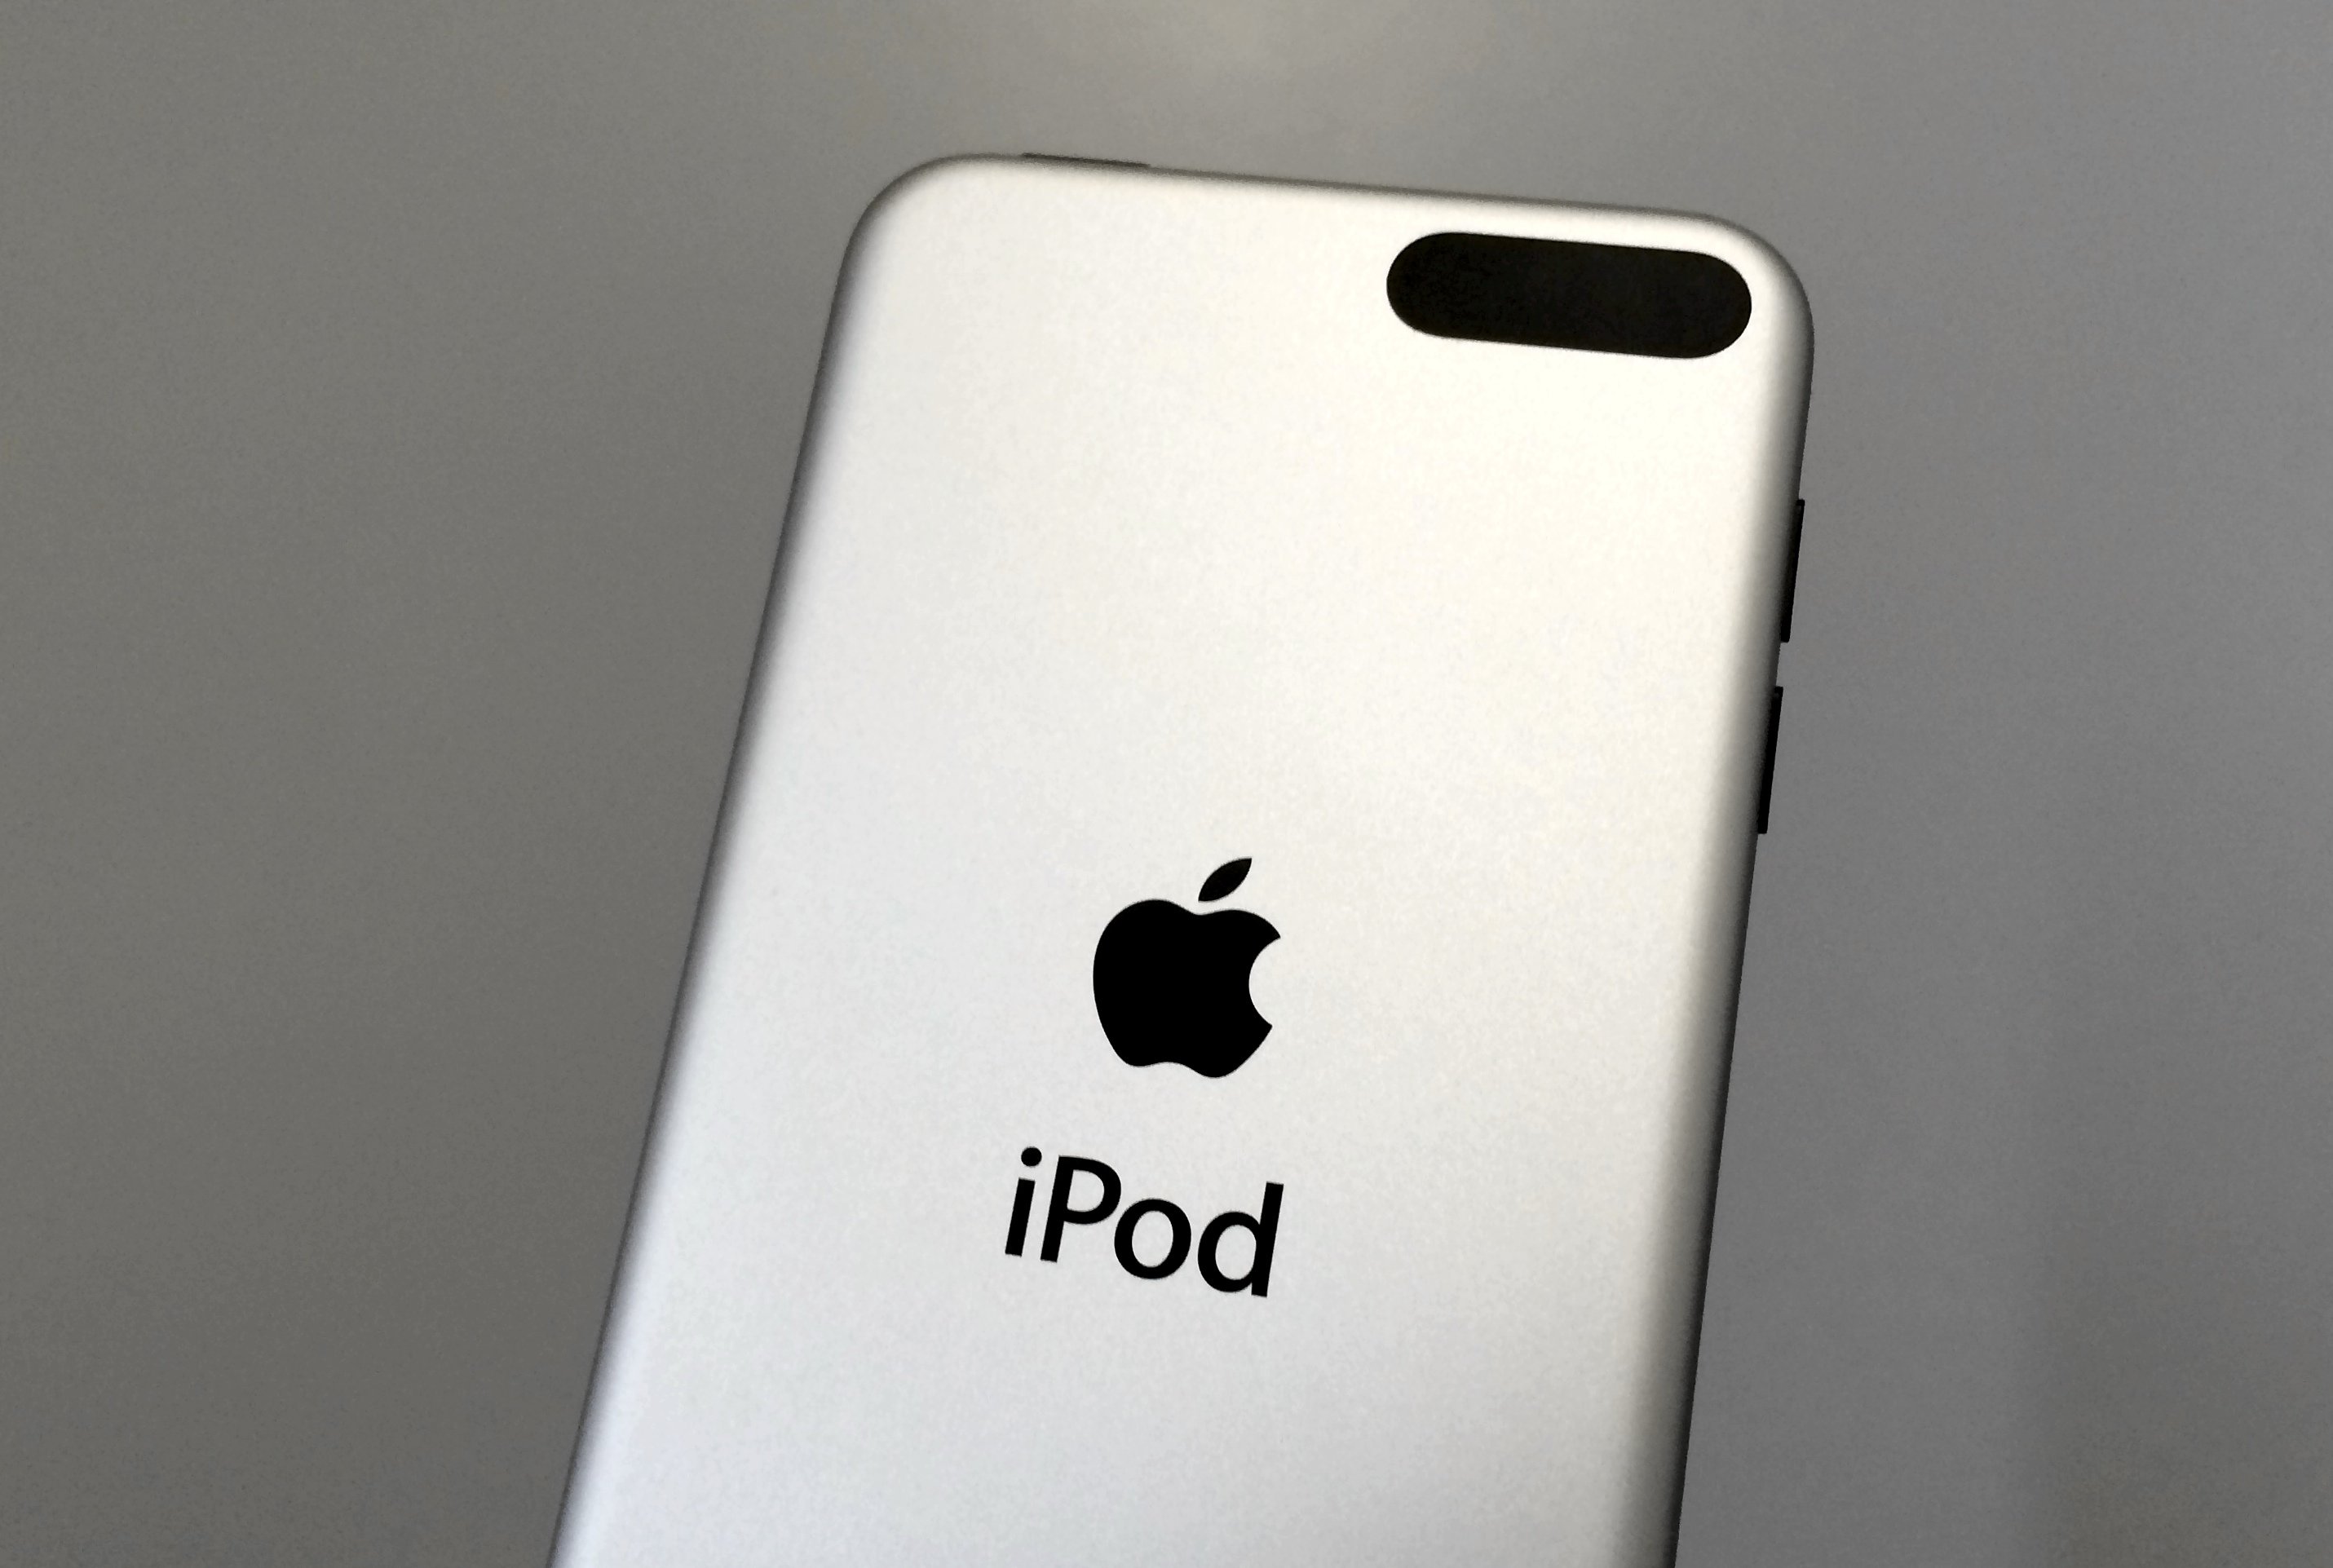 New iPod touch release date 2015 possibilities are limited.